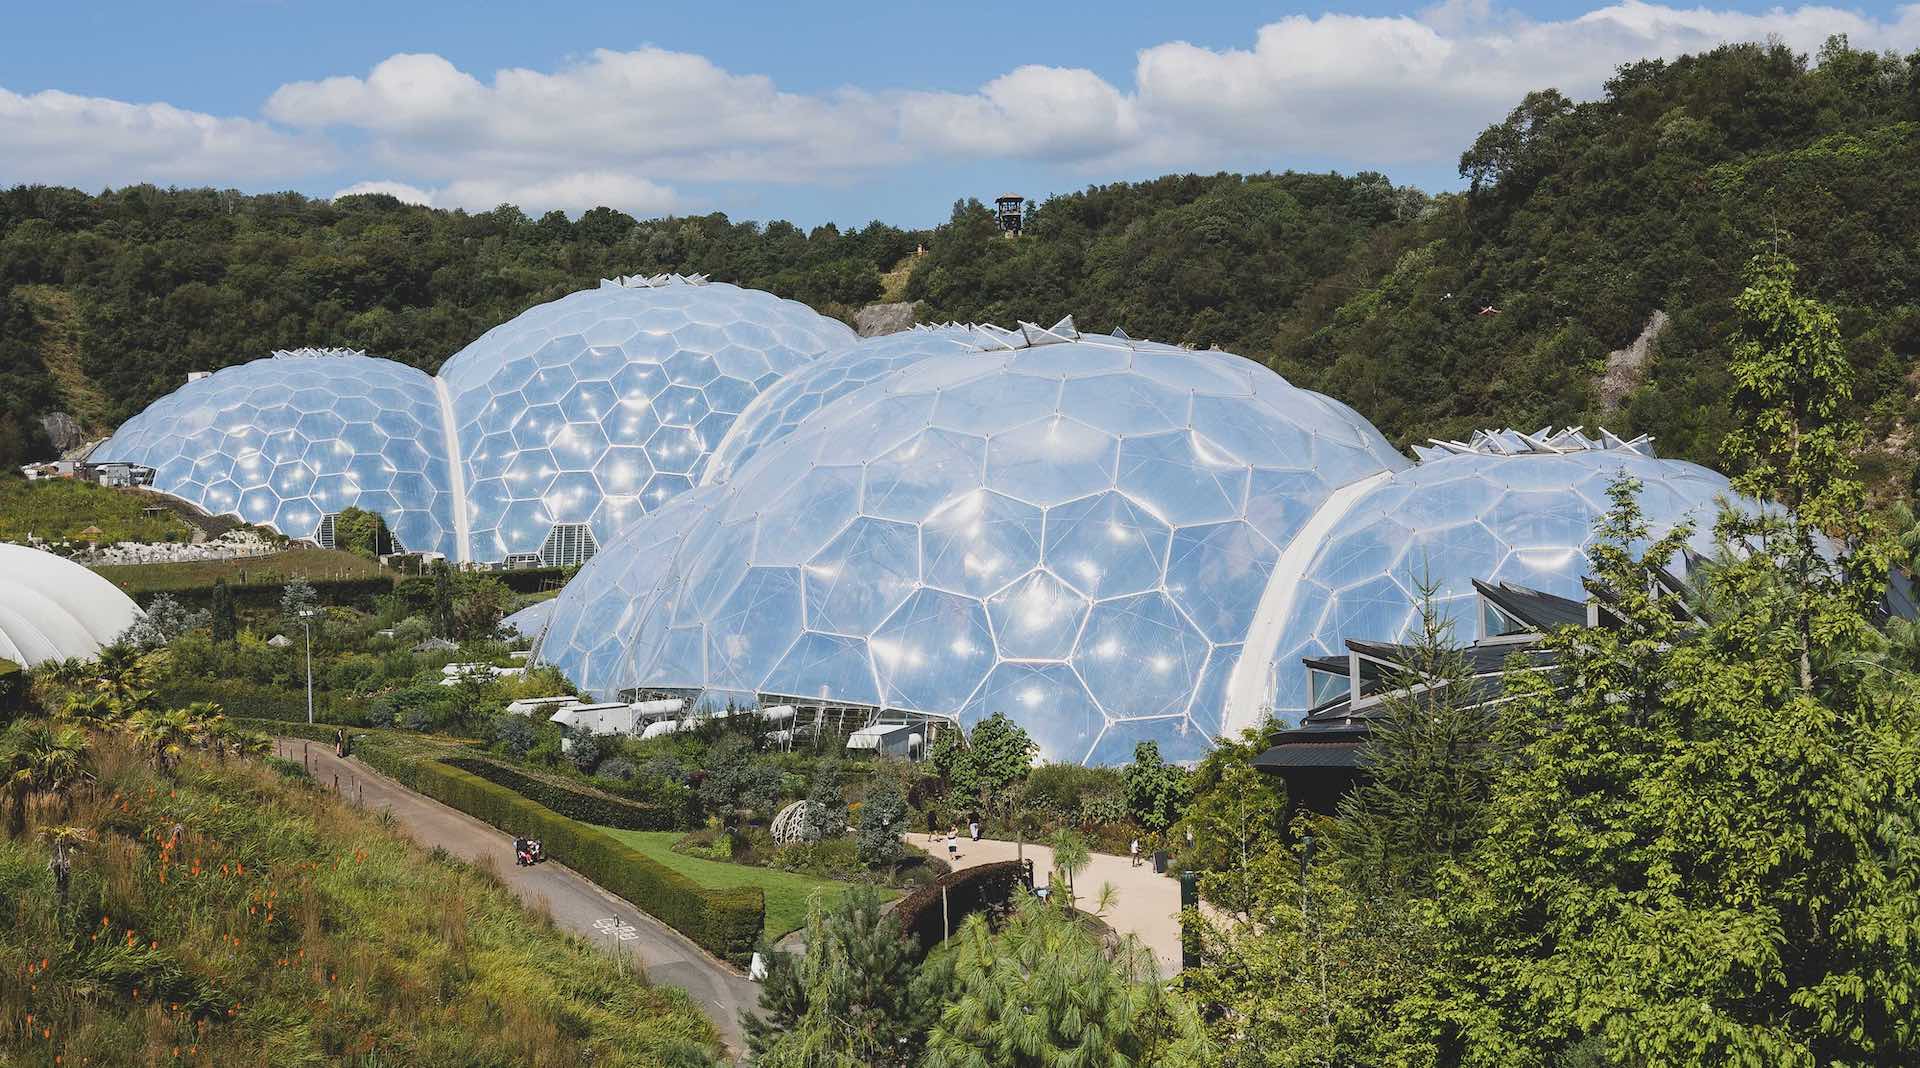 The Eden Project is a visitor attraction in Cornwall, England, UK.